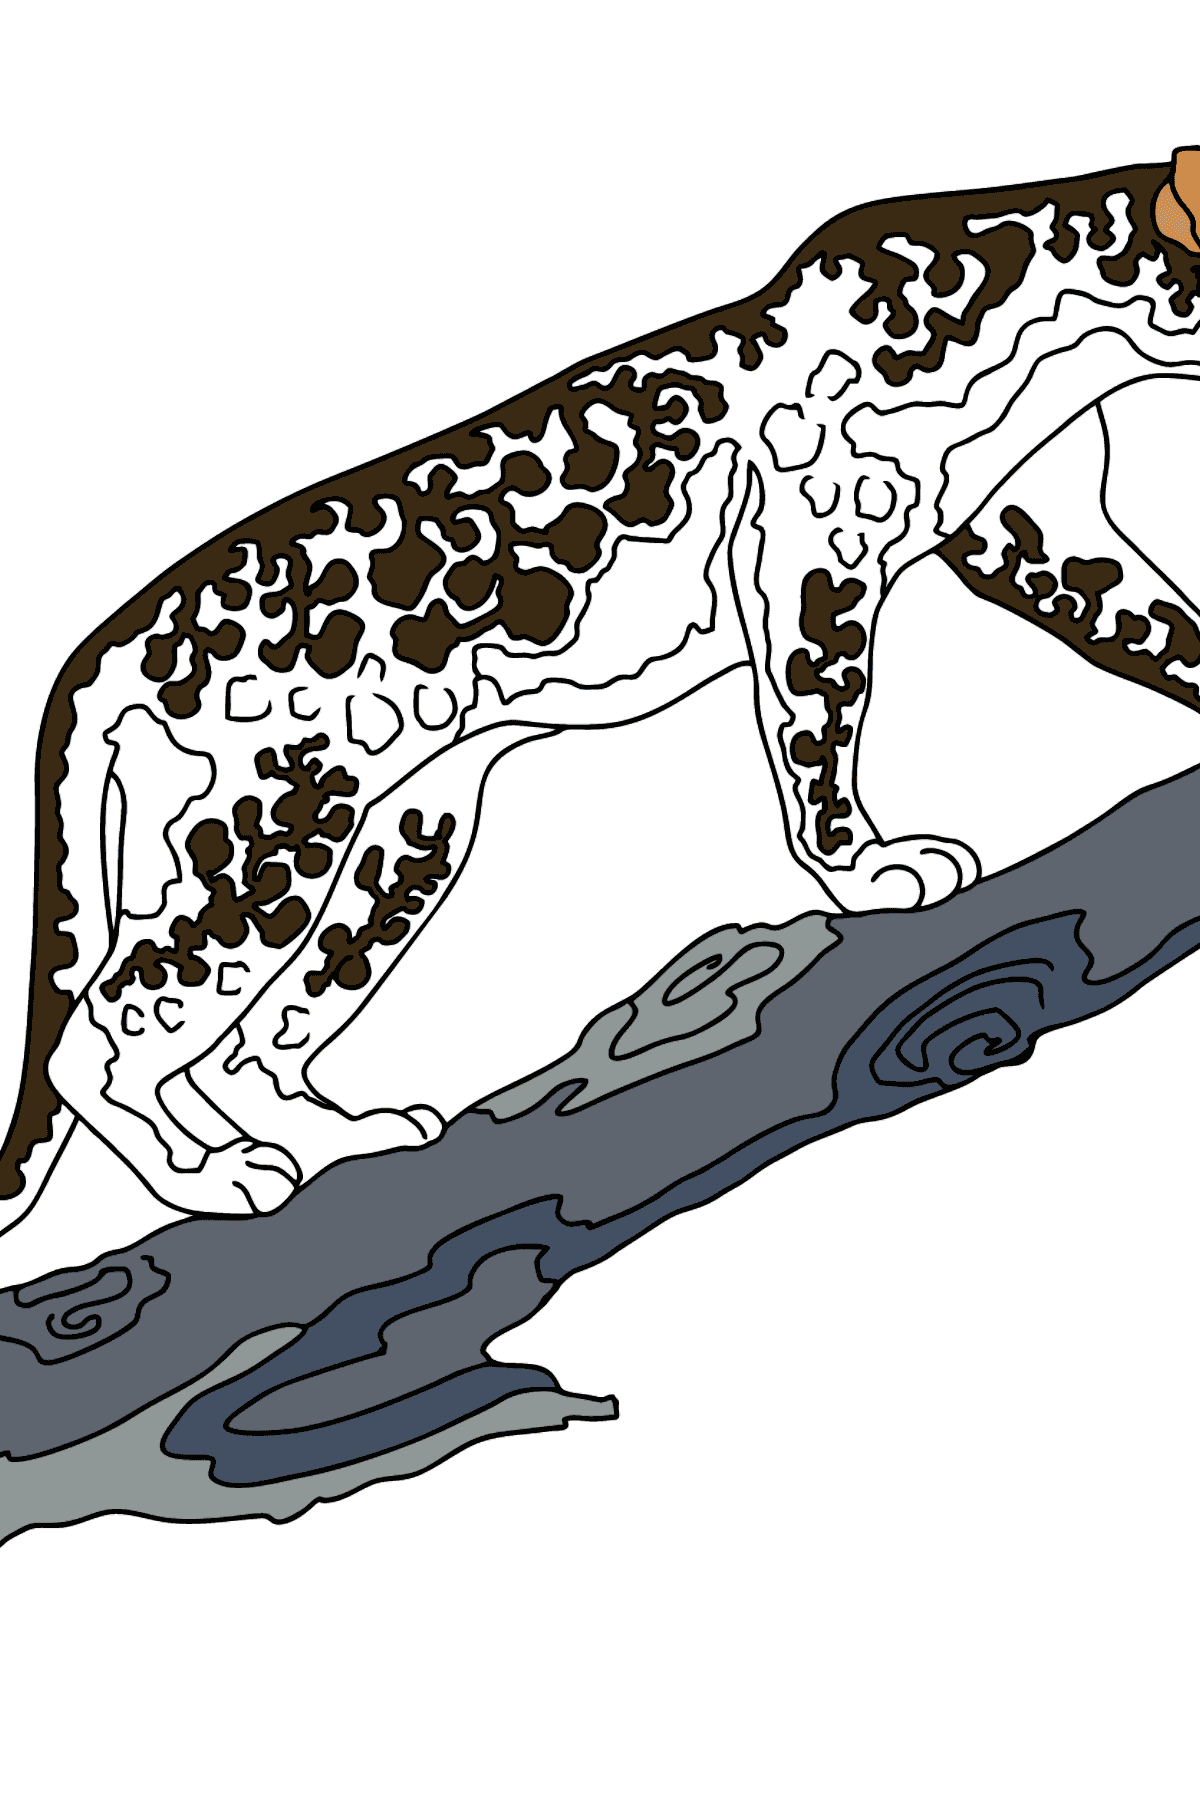 Coloring Page - A Leopard on a Branch - Coloring Pages for Kids